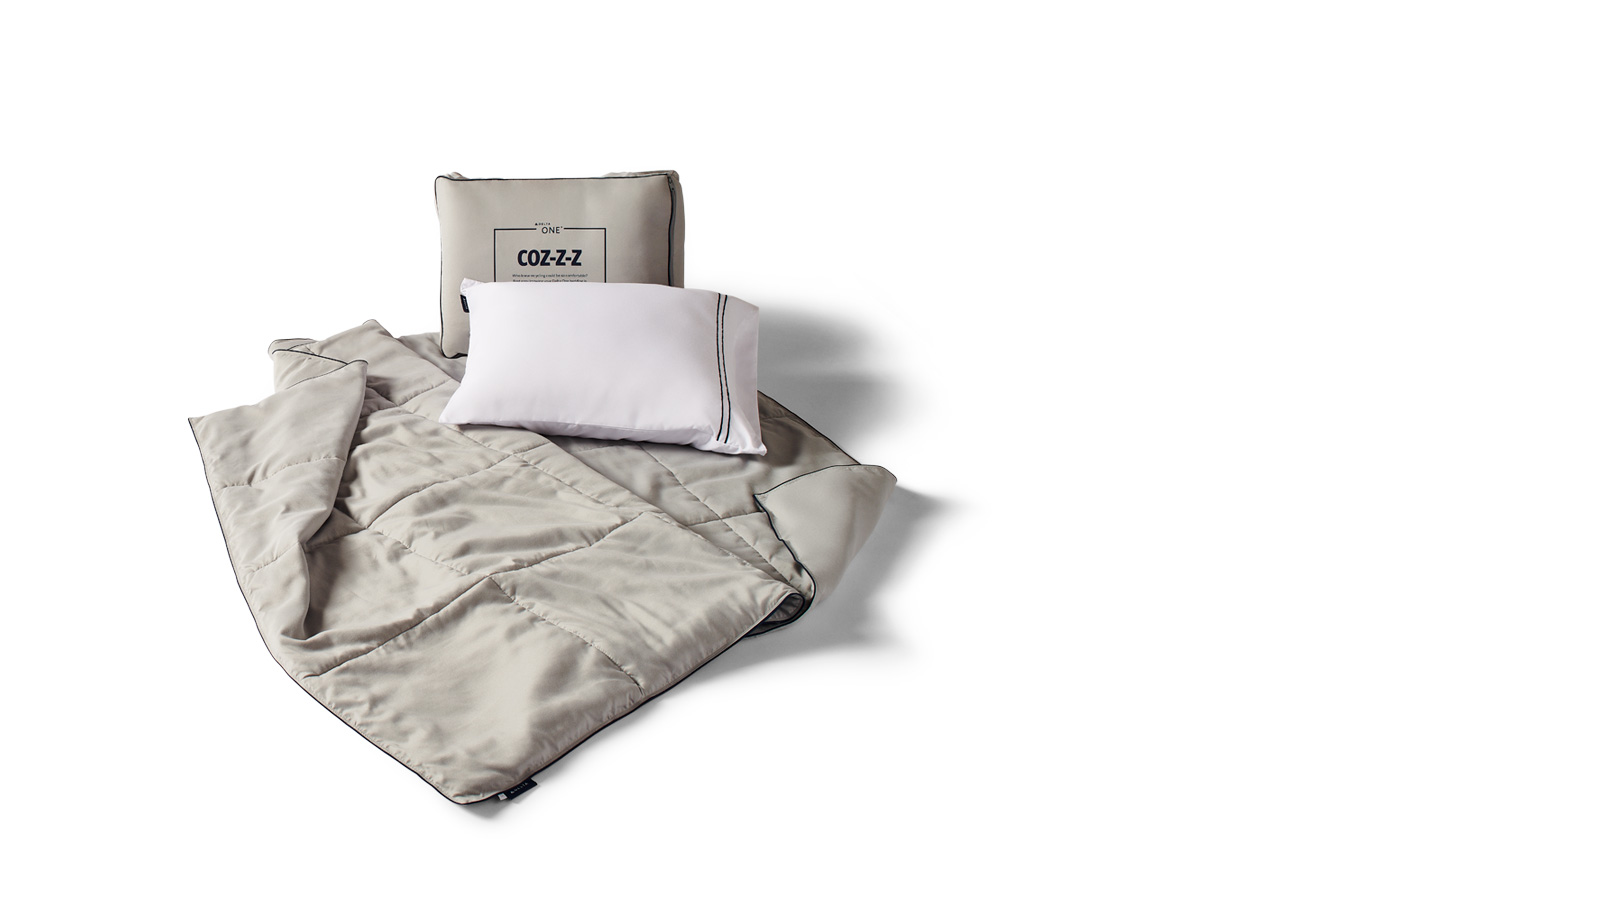 Delta One Bedding Made from Recycled Materials